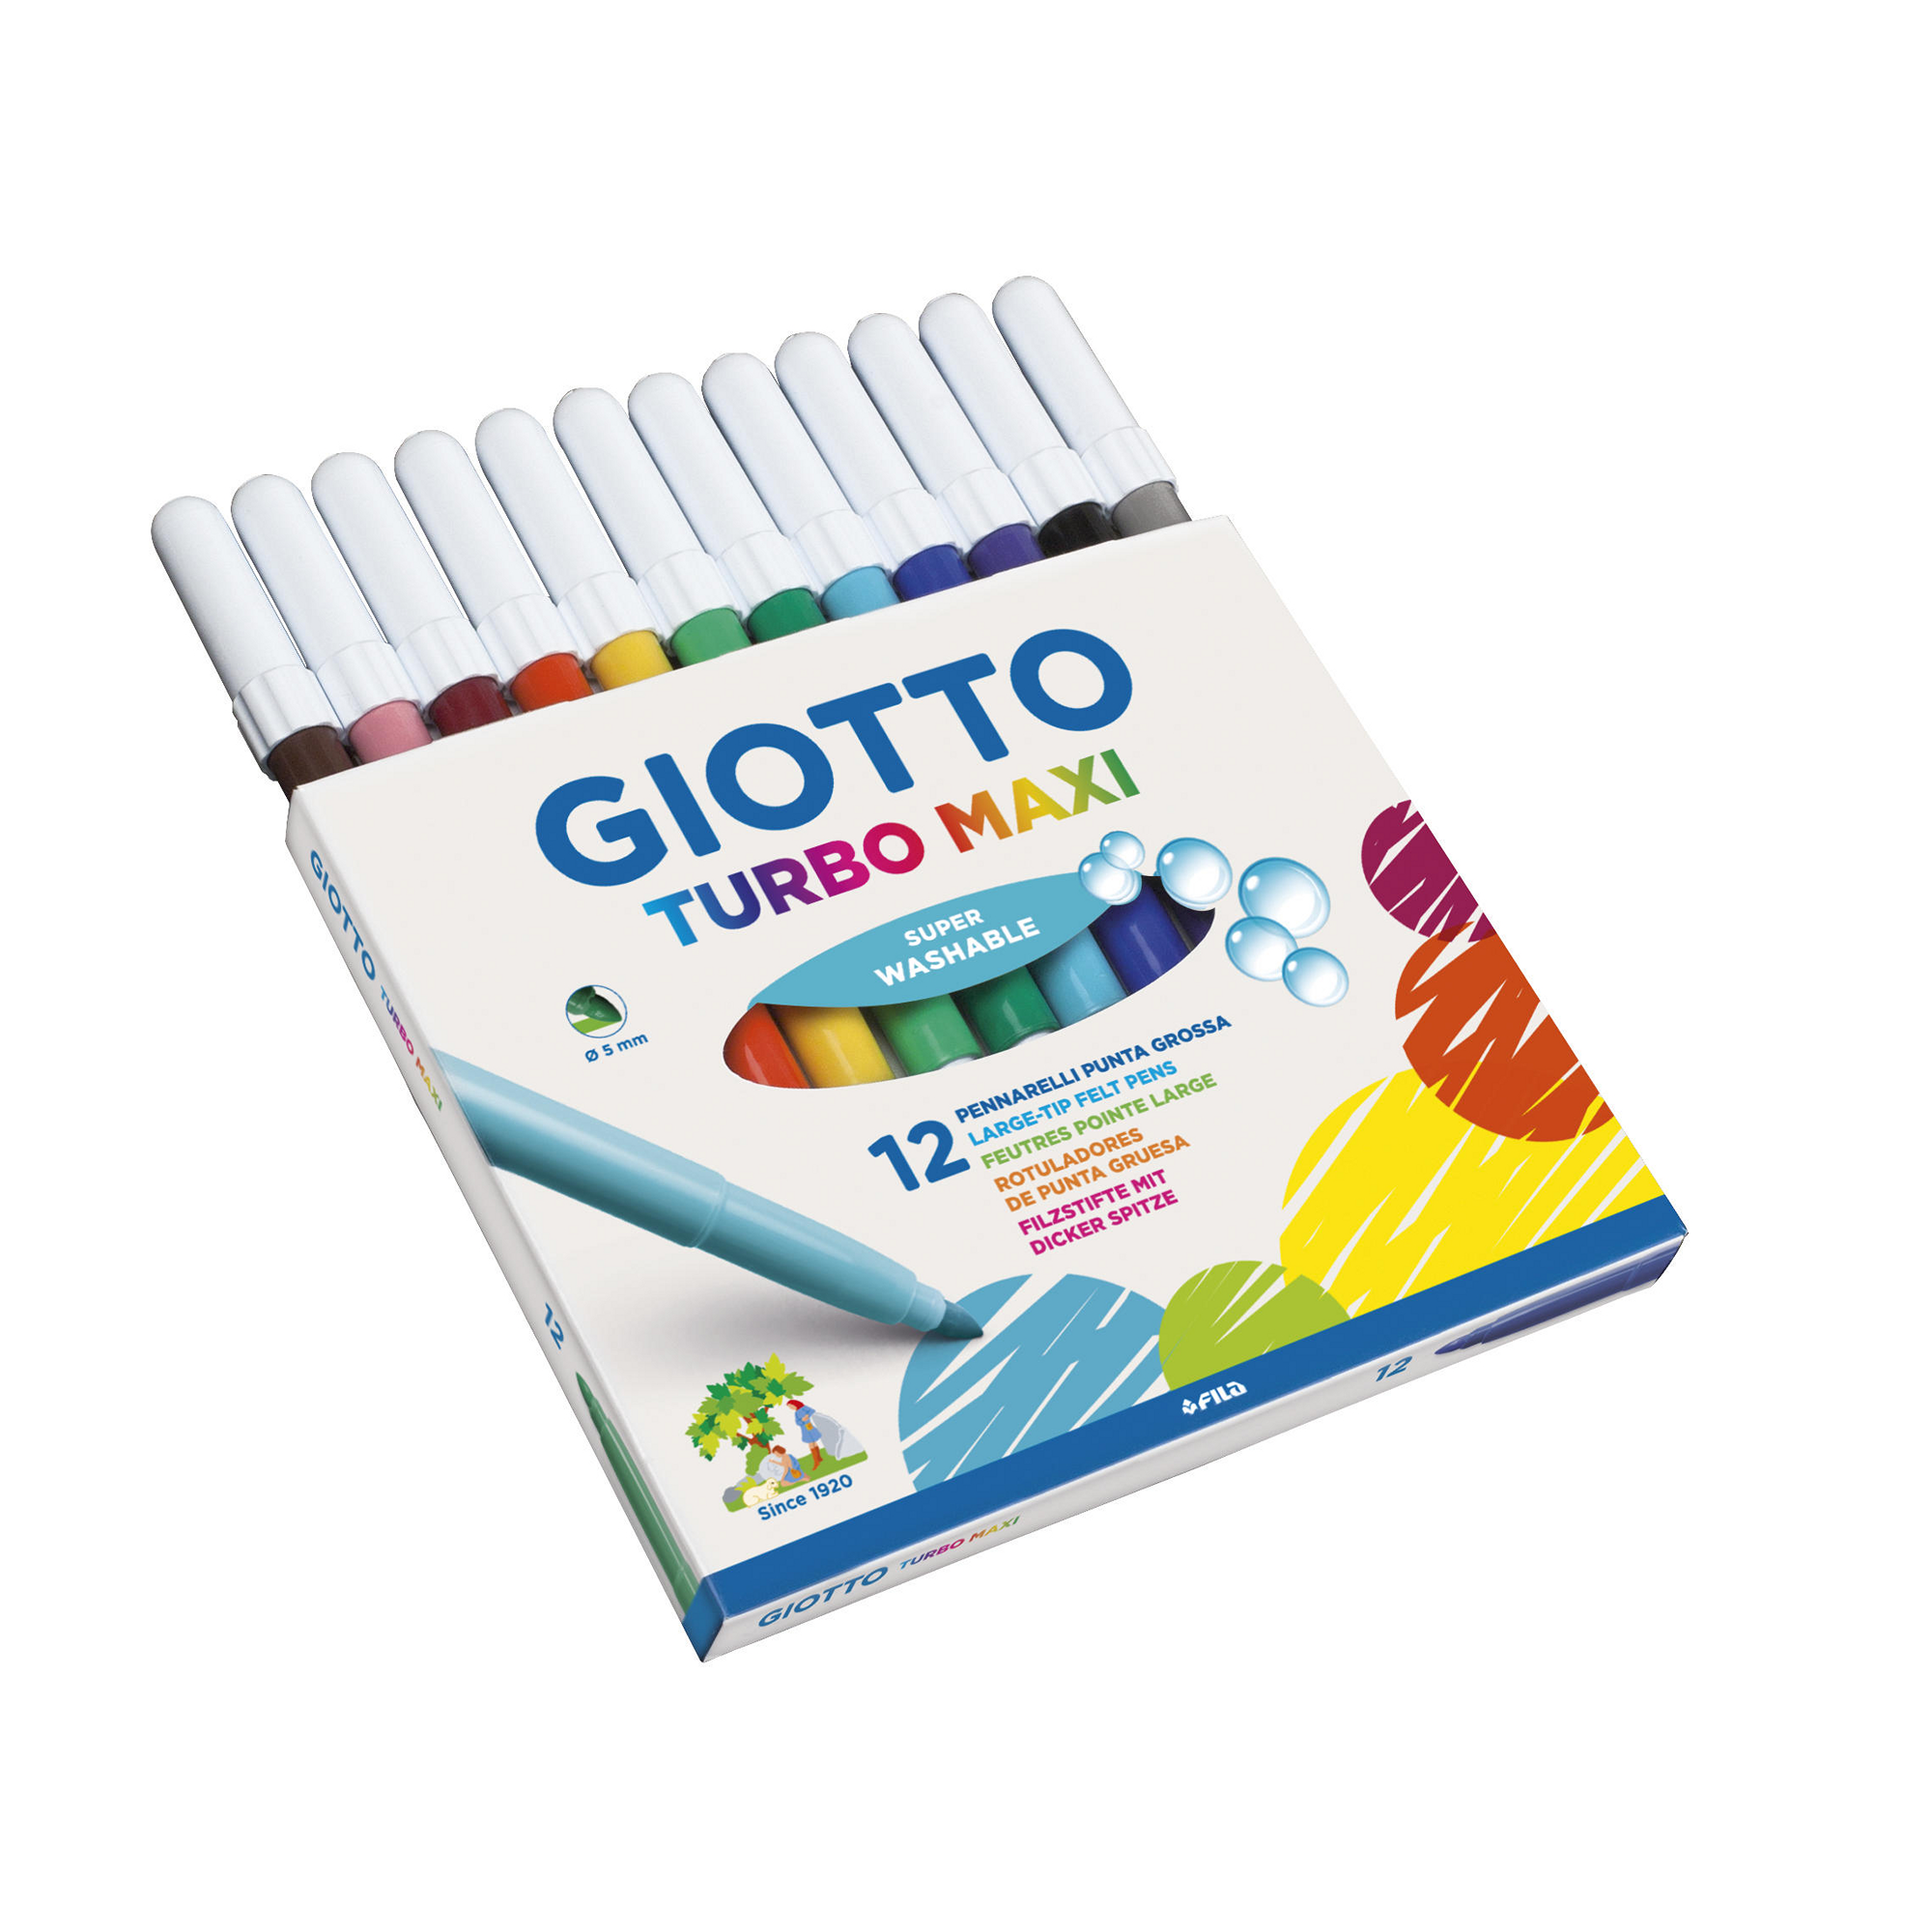 HE346066 - GIOTTO Turbo Maxi Colour Pen - Pack of 12